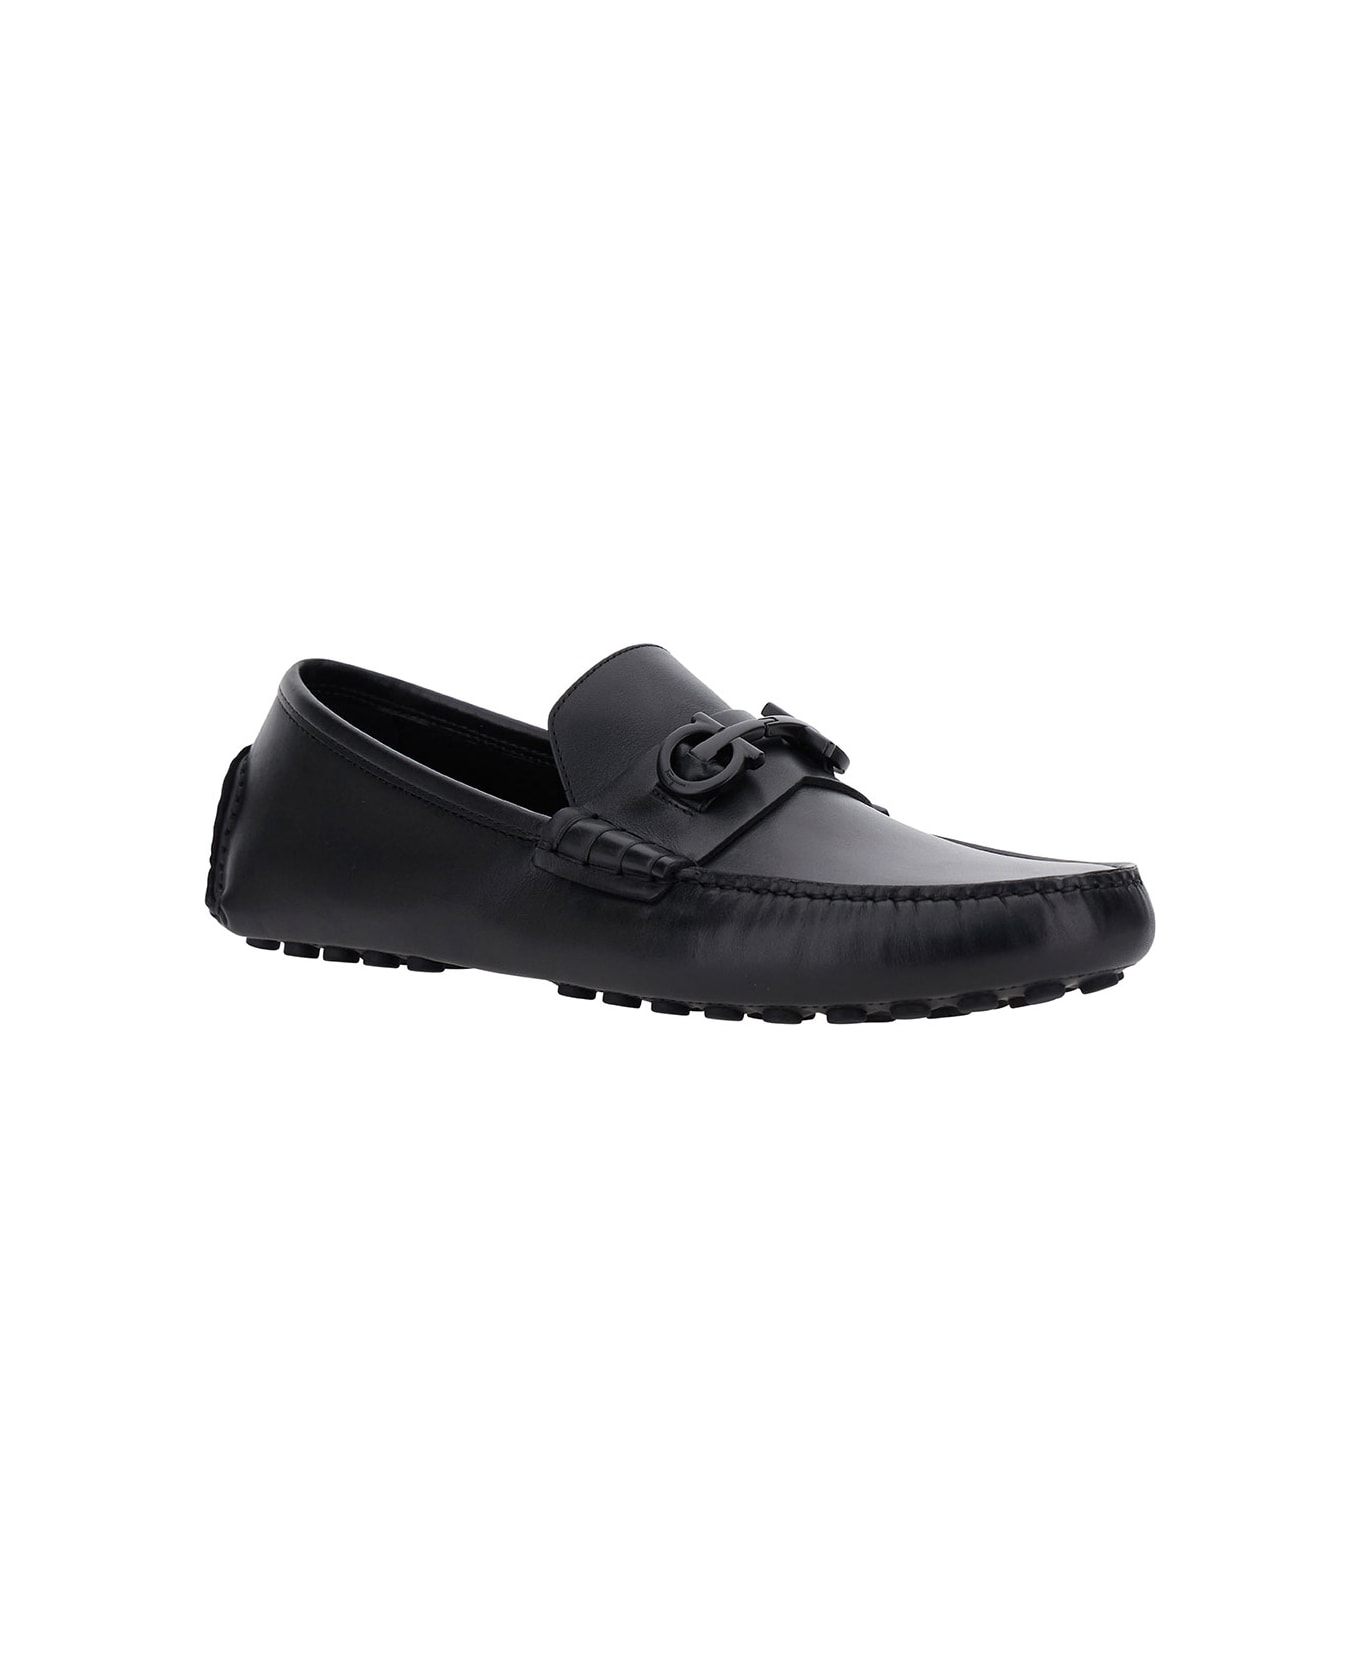 Ferragamo Black Loafers With Tonal Gancini Detail In Leather Man - Black